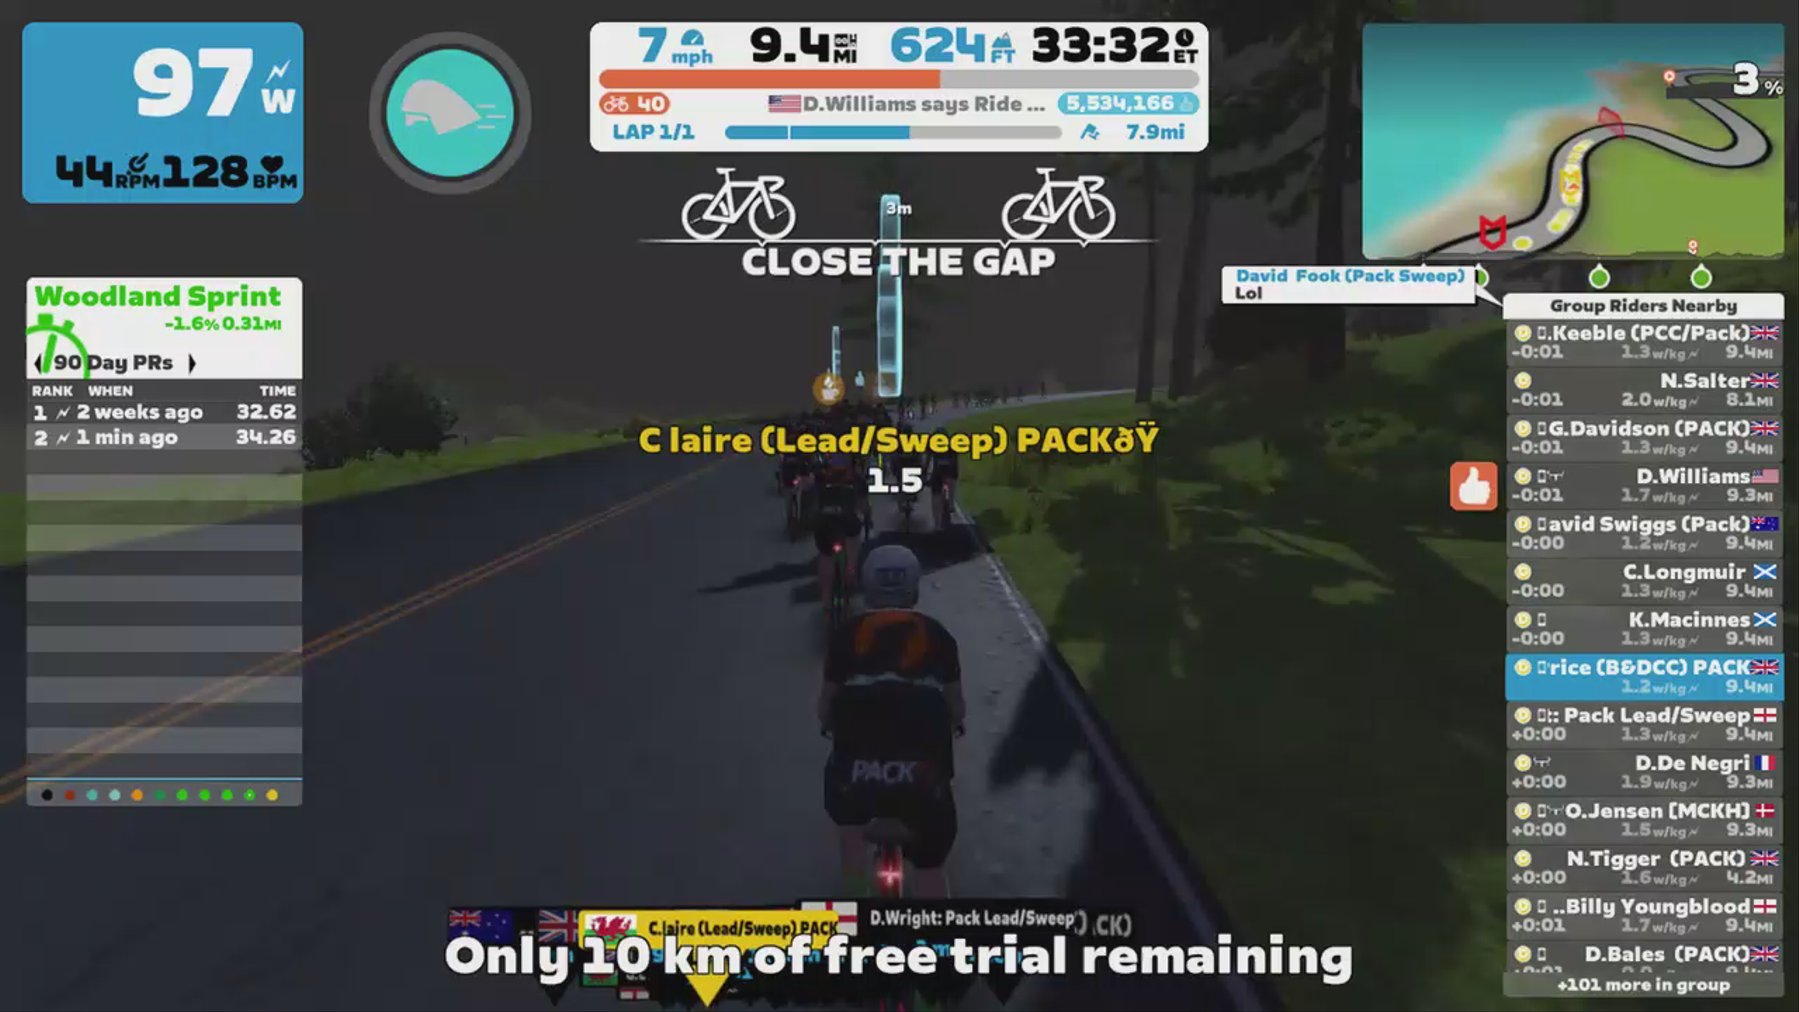 Zwift - Group Ride: PACK 1.5 Morning Cuppa (D) on Canopies and Coastlines in Watopia